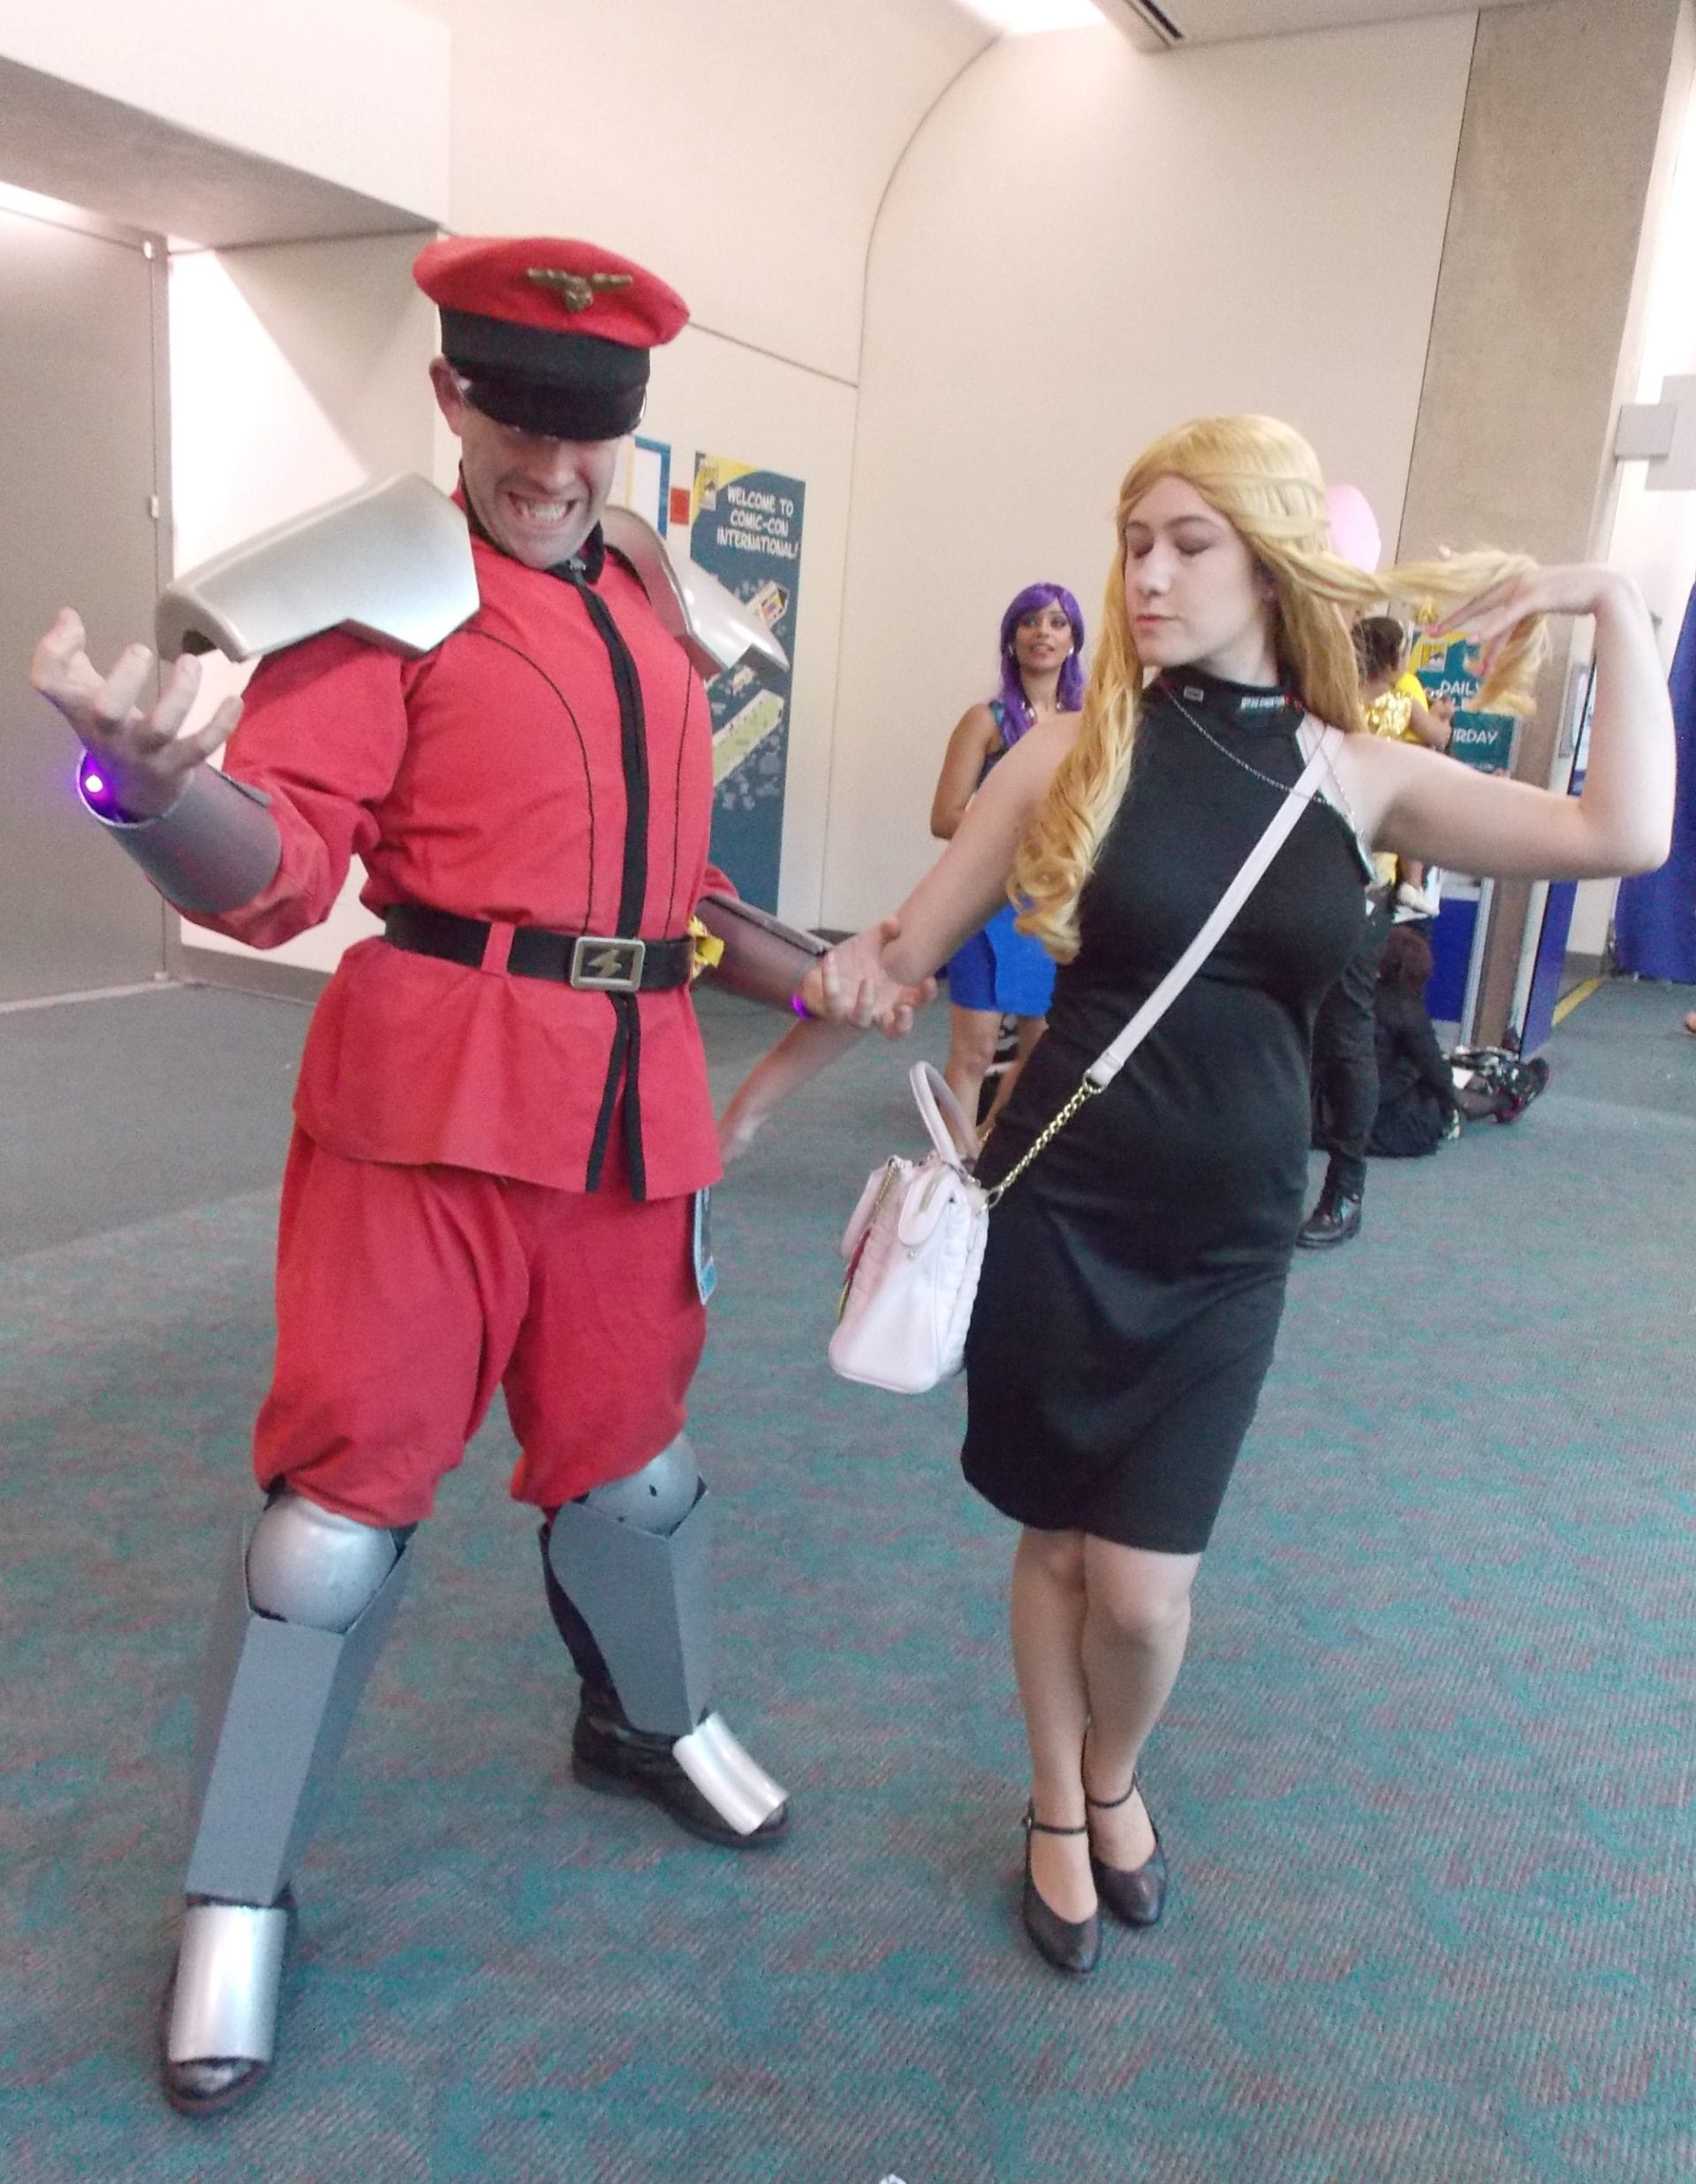 M. Bison and Karin